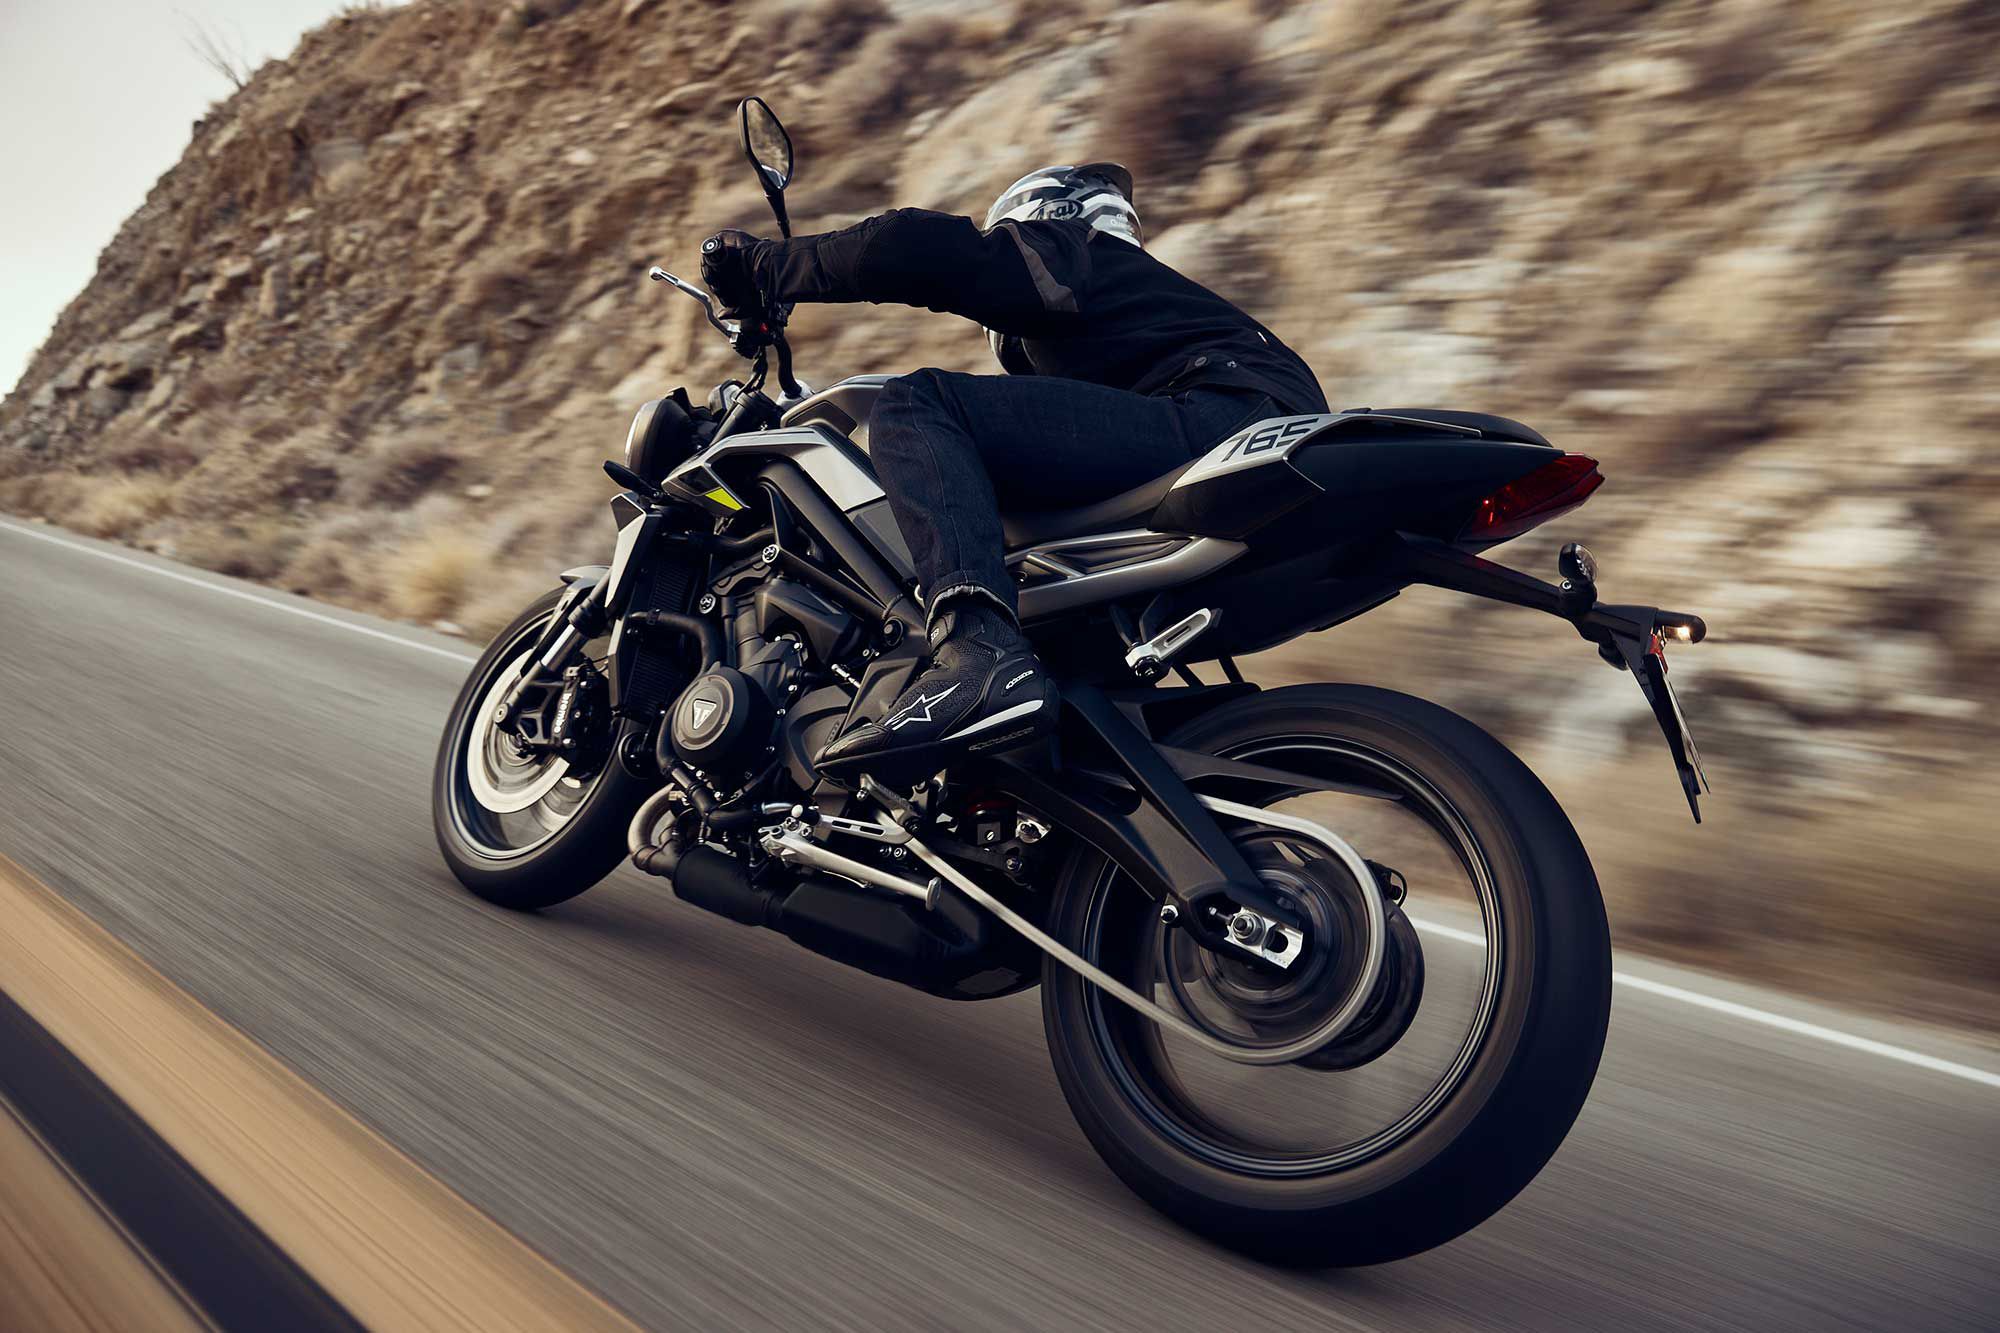 The Triumph Street Triple 765 R, winding through un-wintry roads and locales.